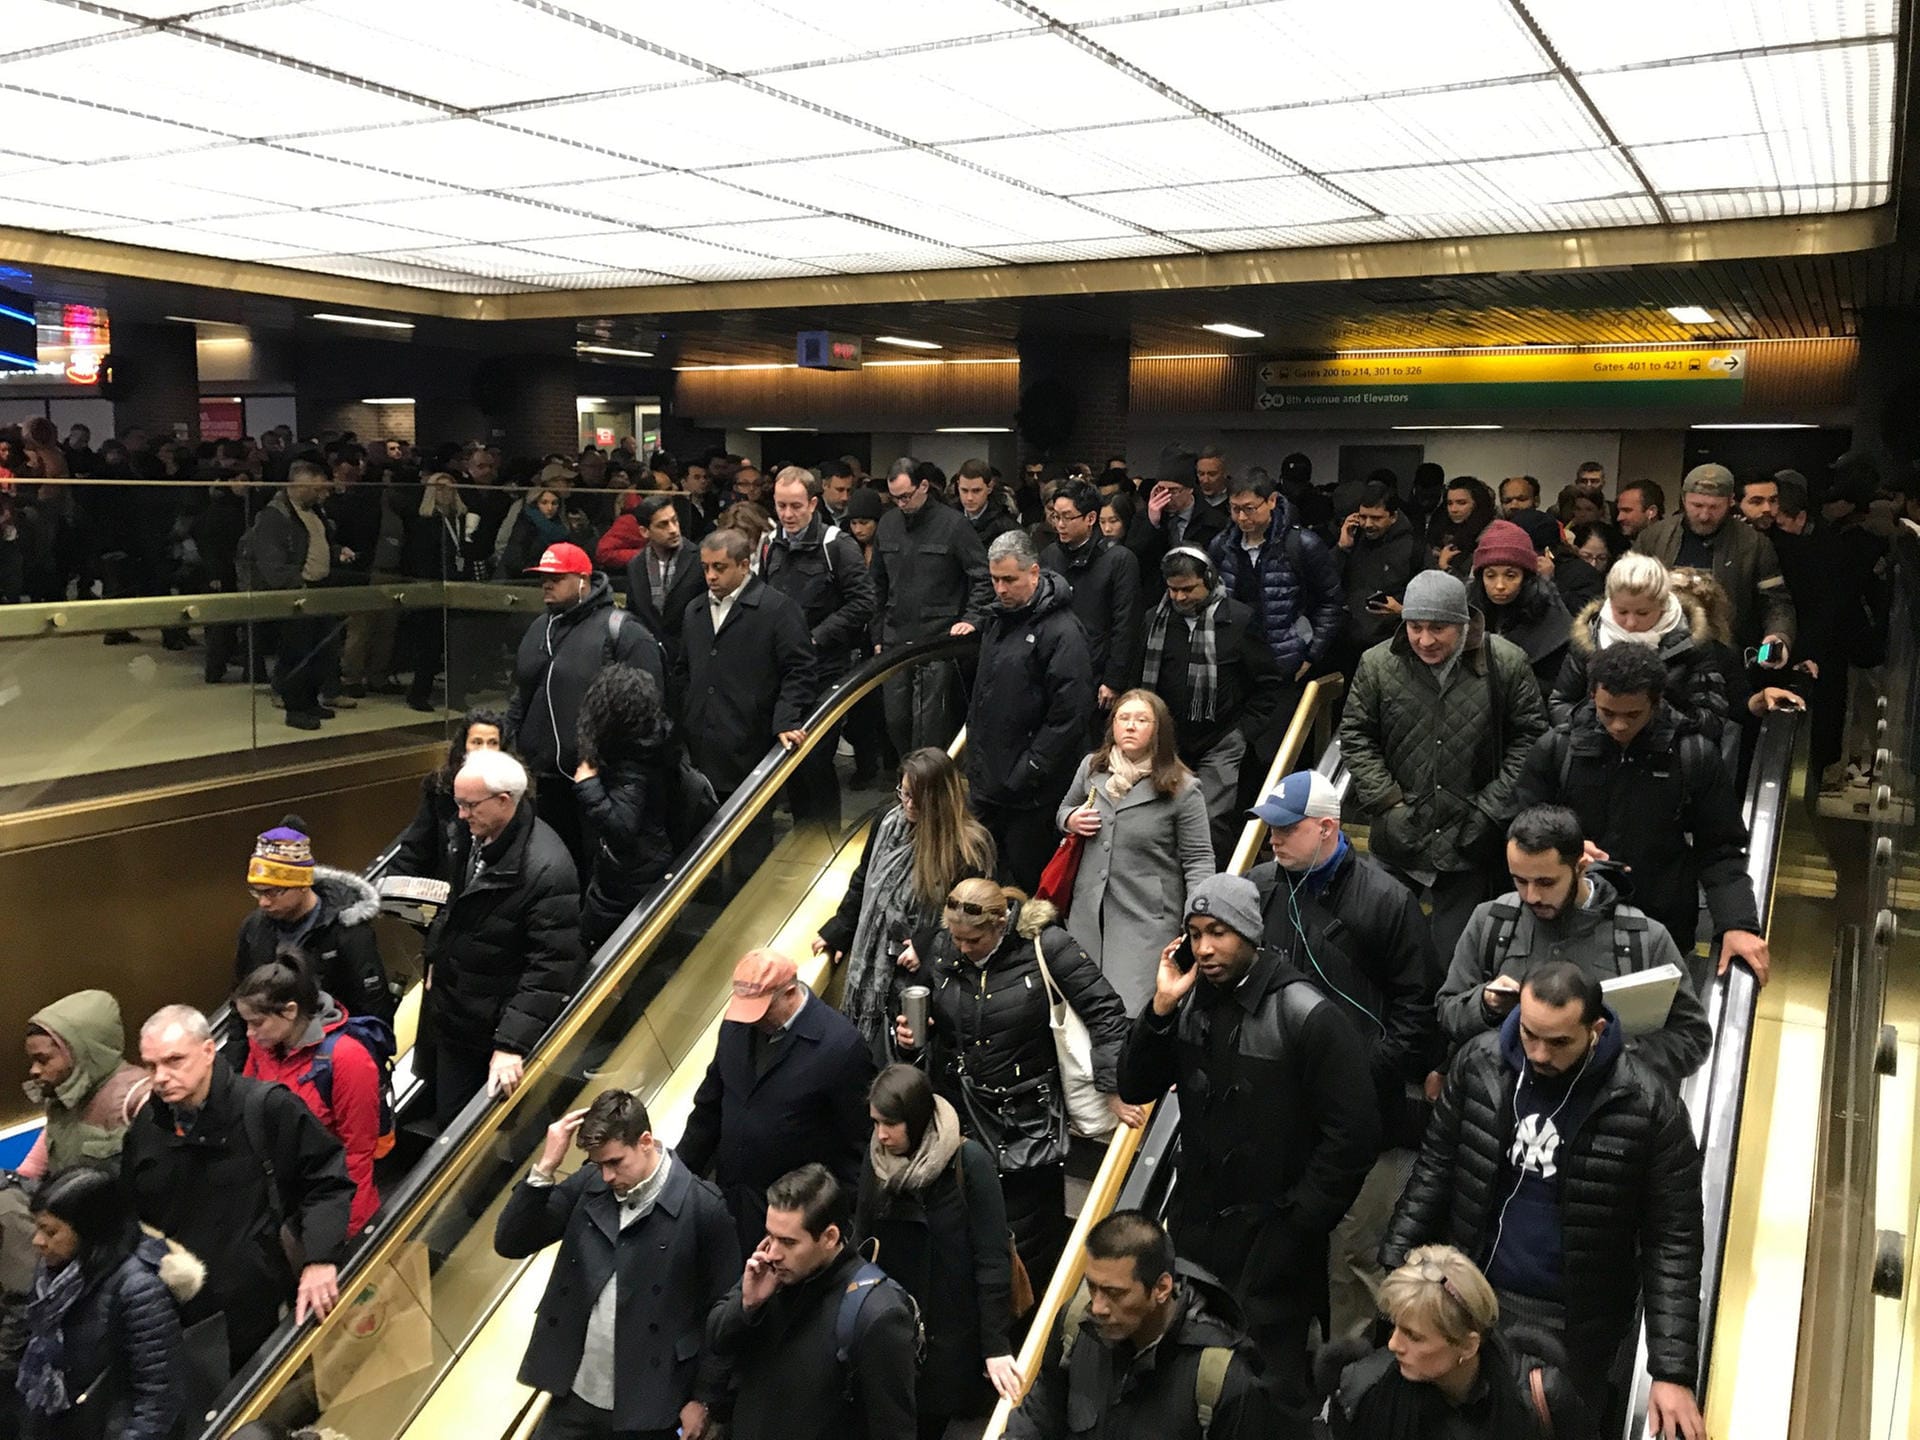 Commuters exit the New York Port Authority in New York City after reports of an explosion